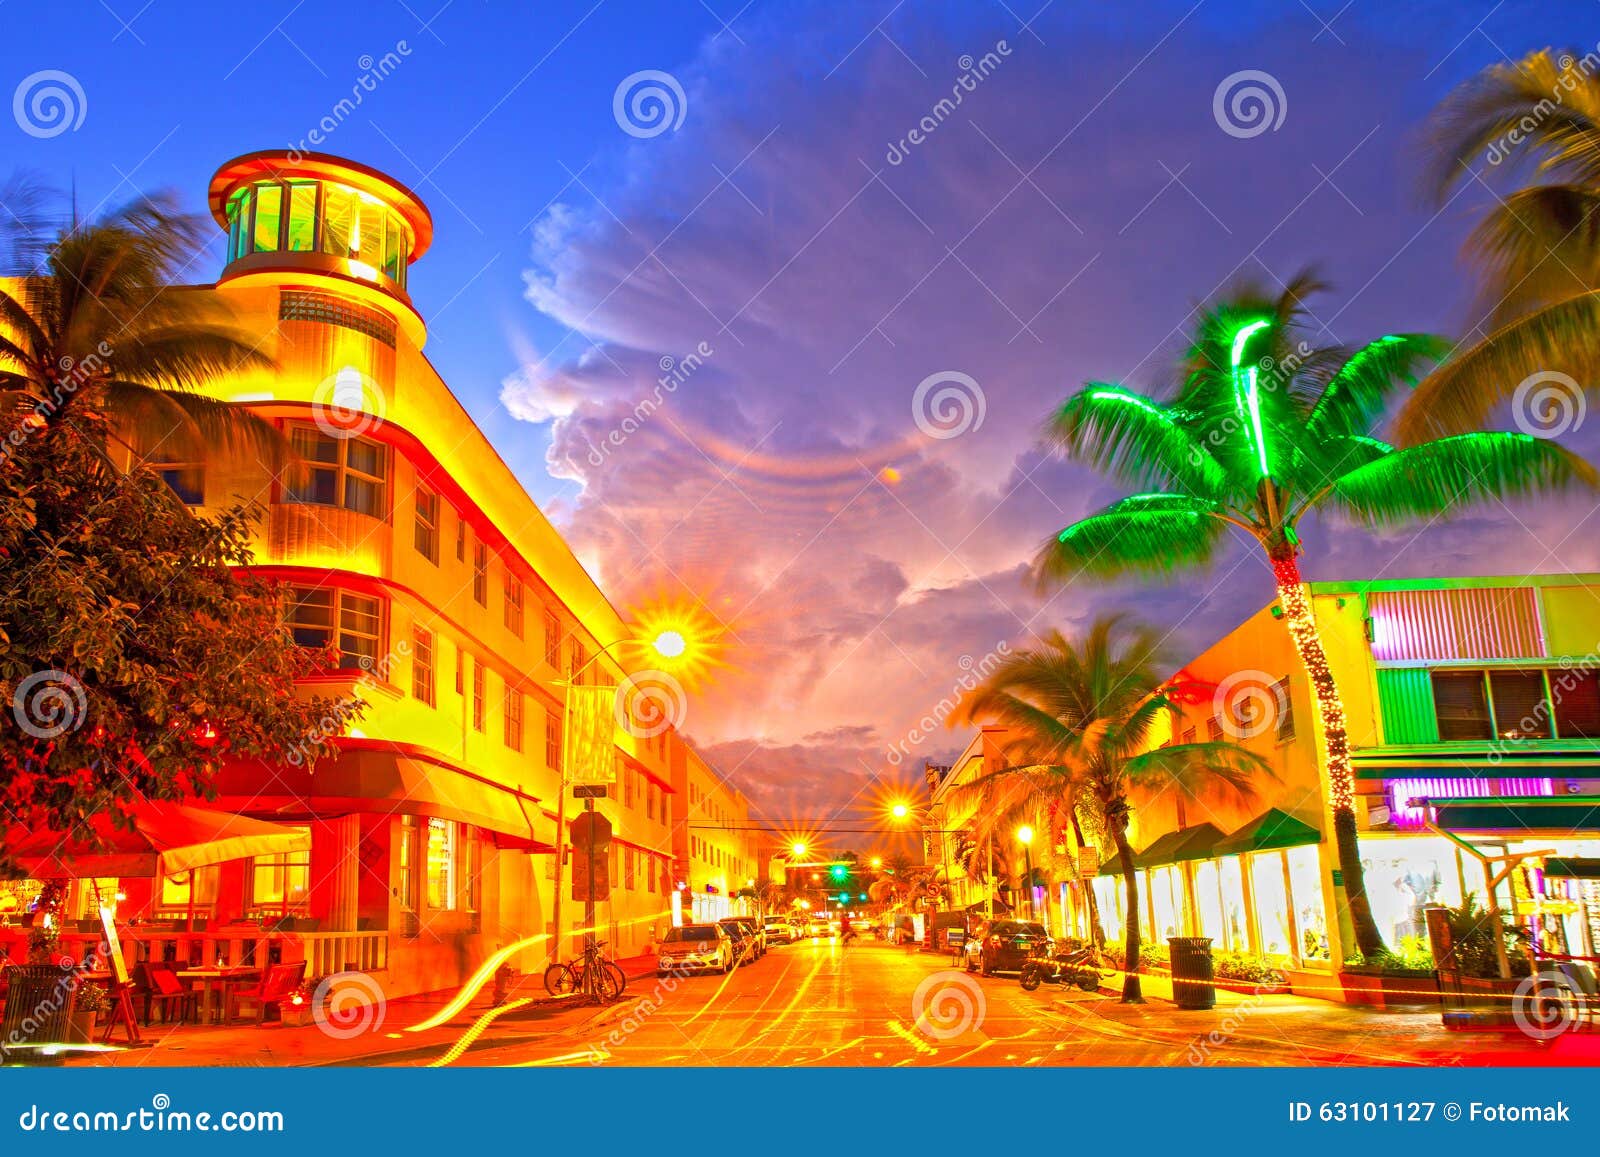 miami beach, florida moving traffic hotels and restaurants at sunset on ocean drive